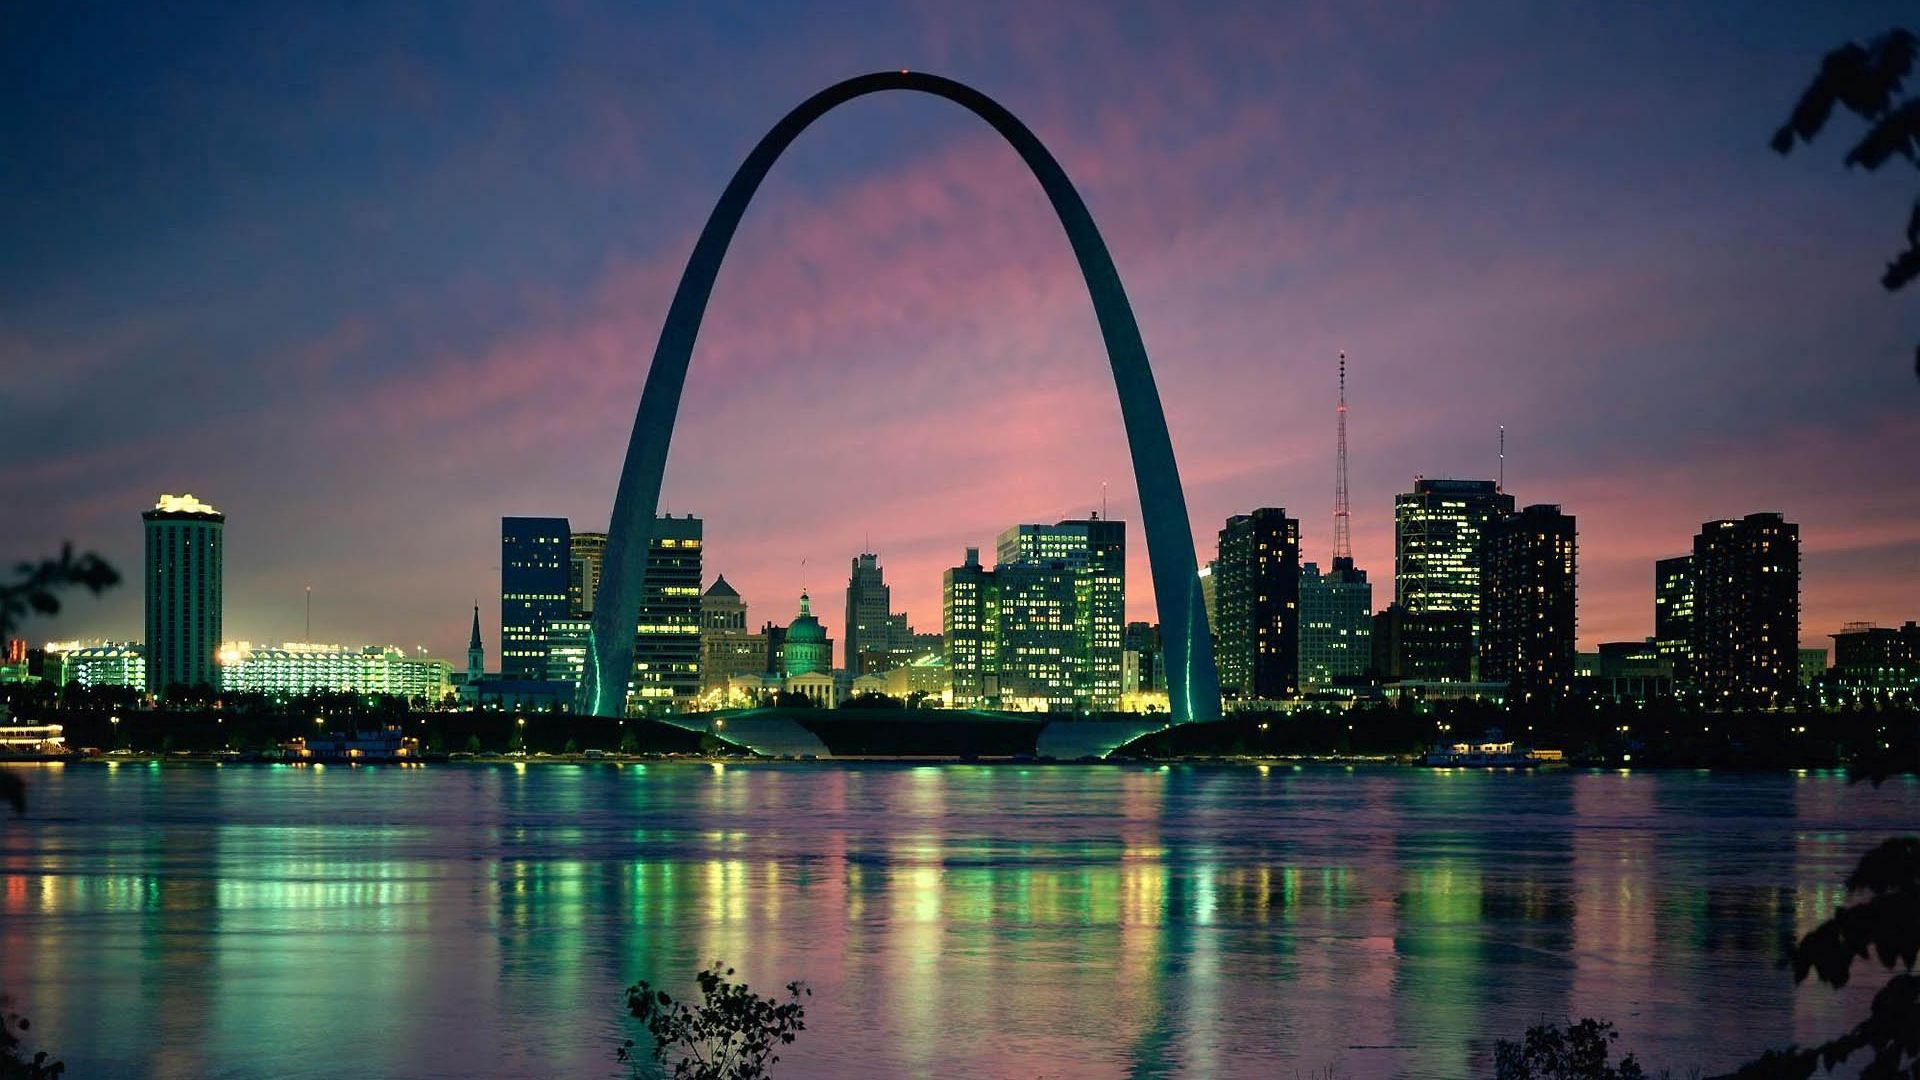 gate of the west, arch, cities, usa, building, bridge, evening, united states, st louis cellphone